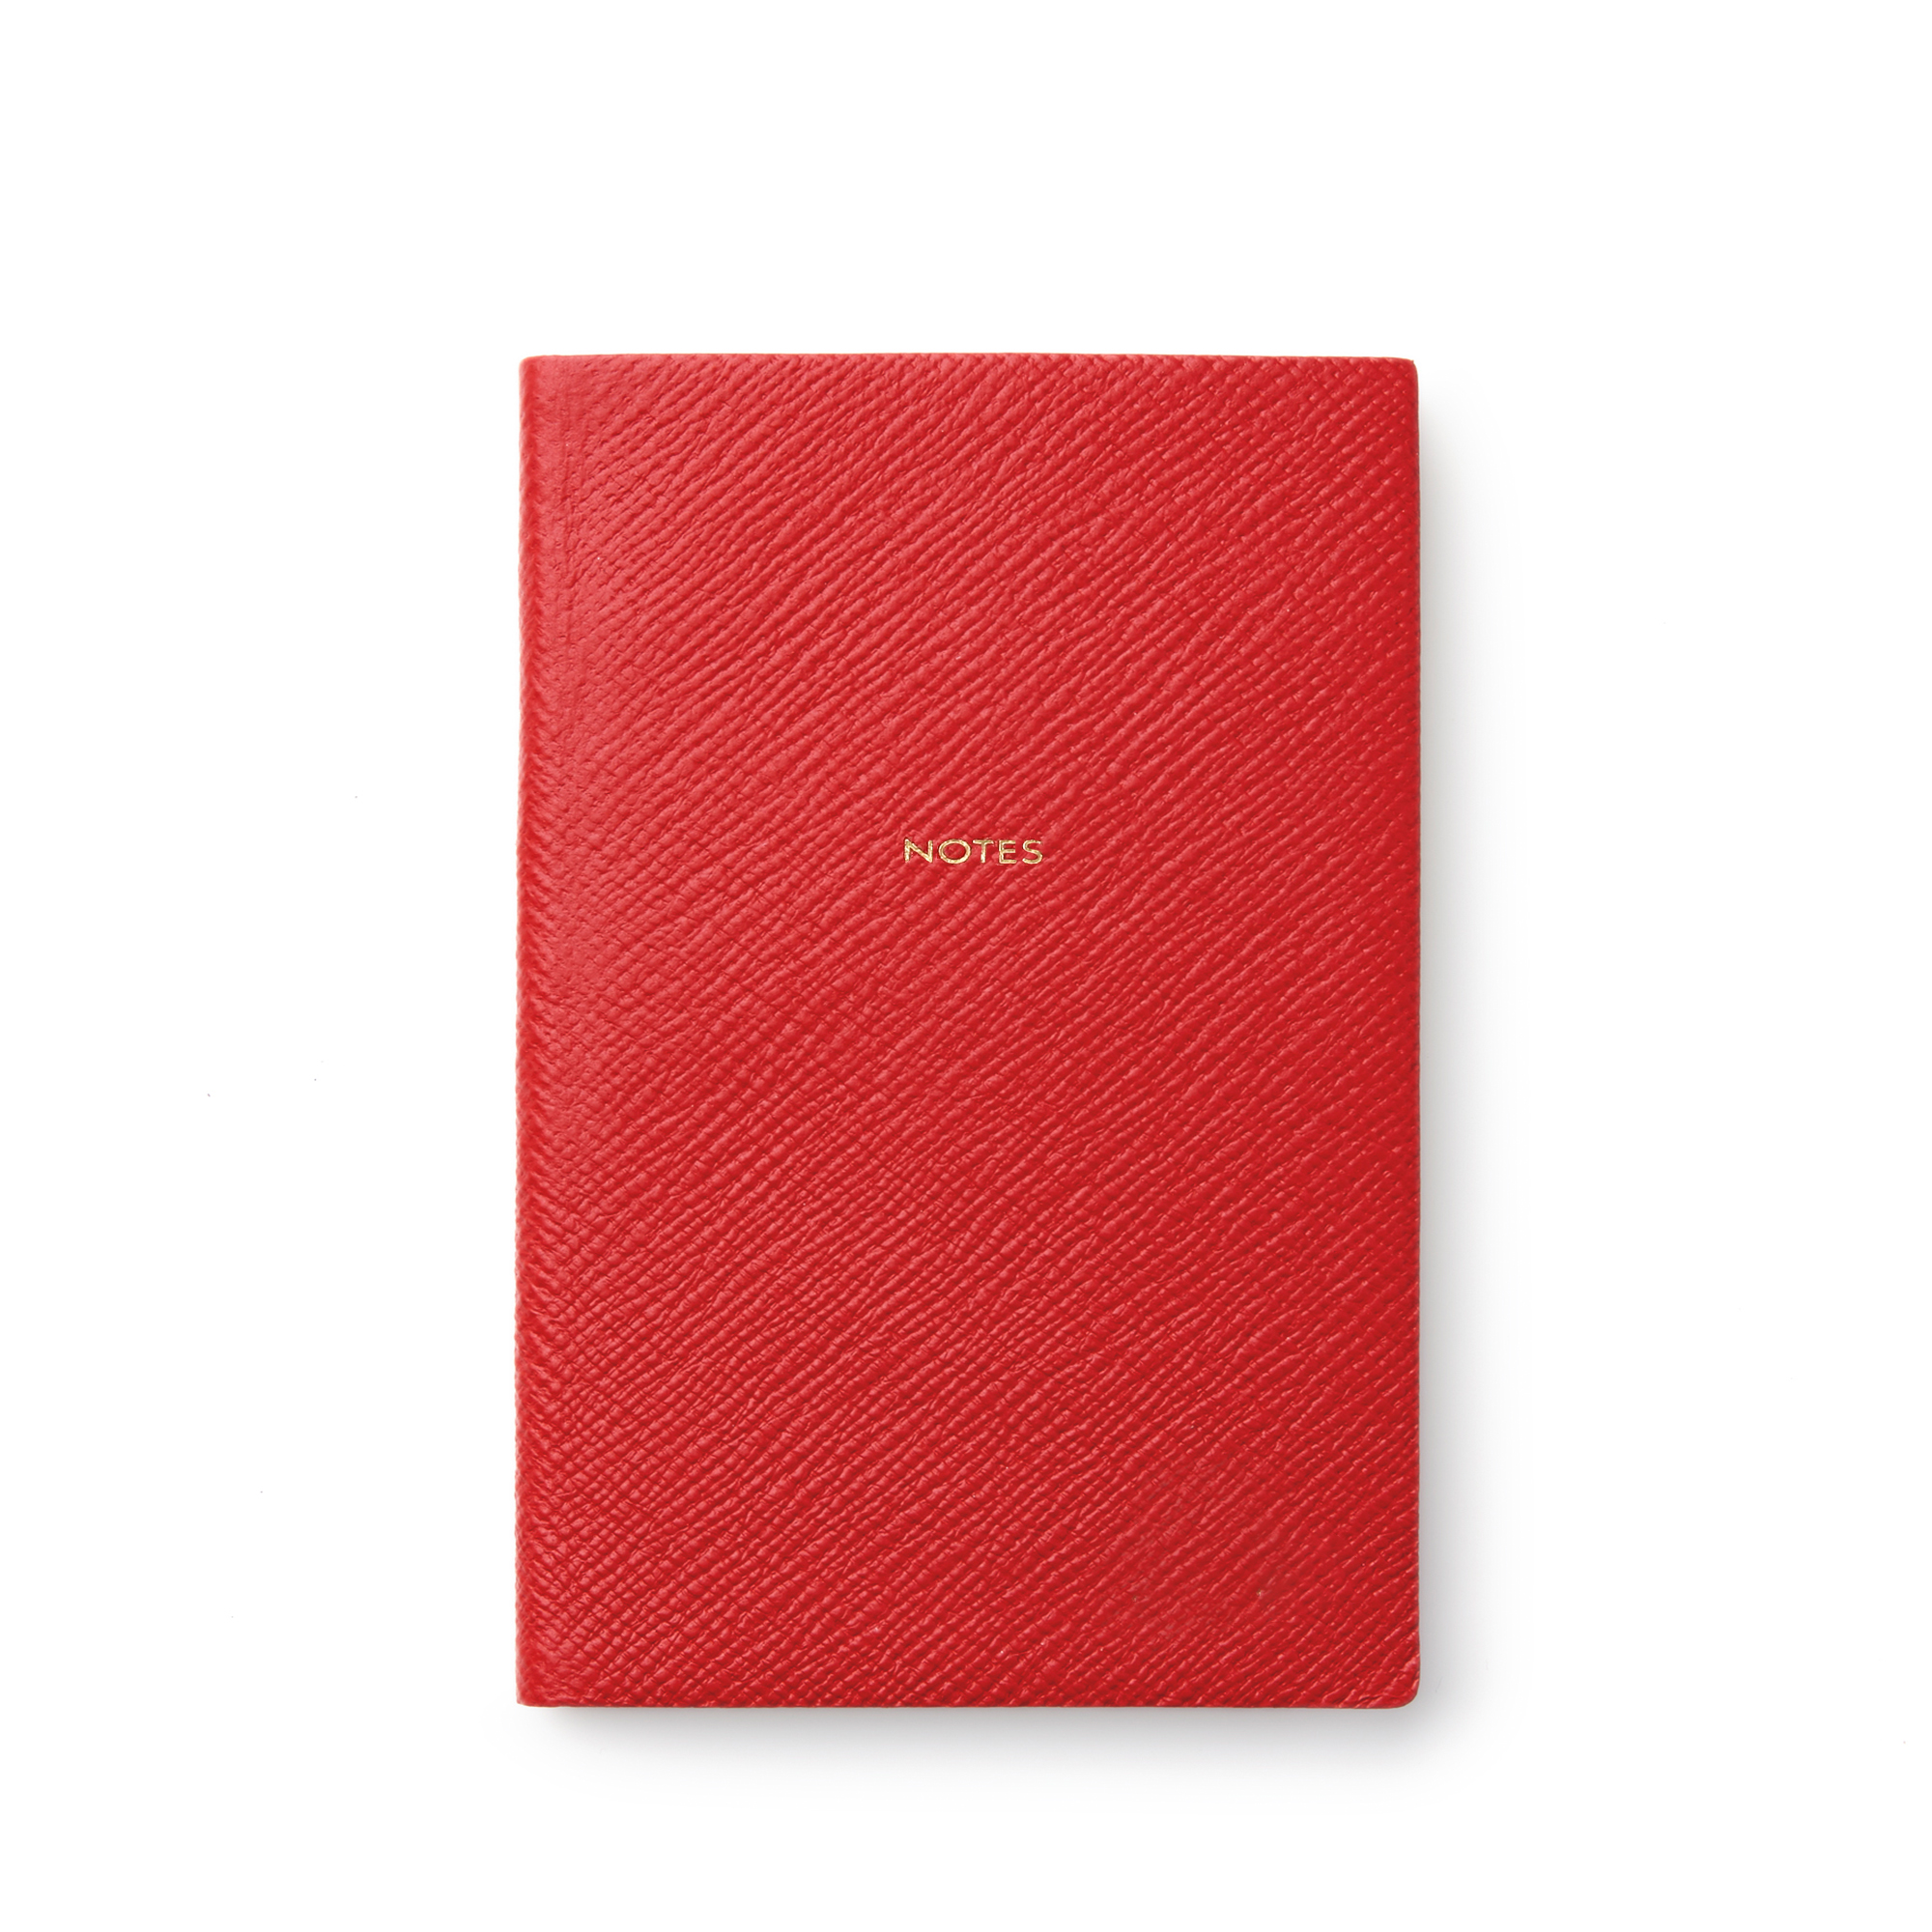 Smythson Notes Chelsea Notebook In Panama In Scarlet Red